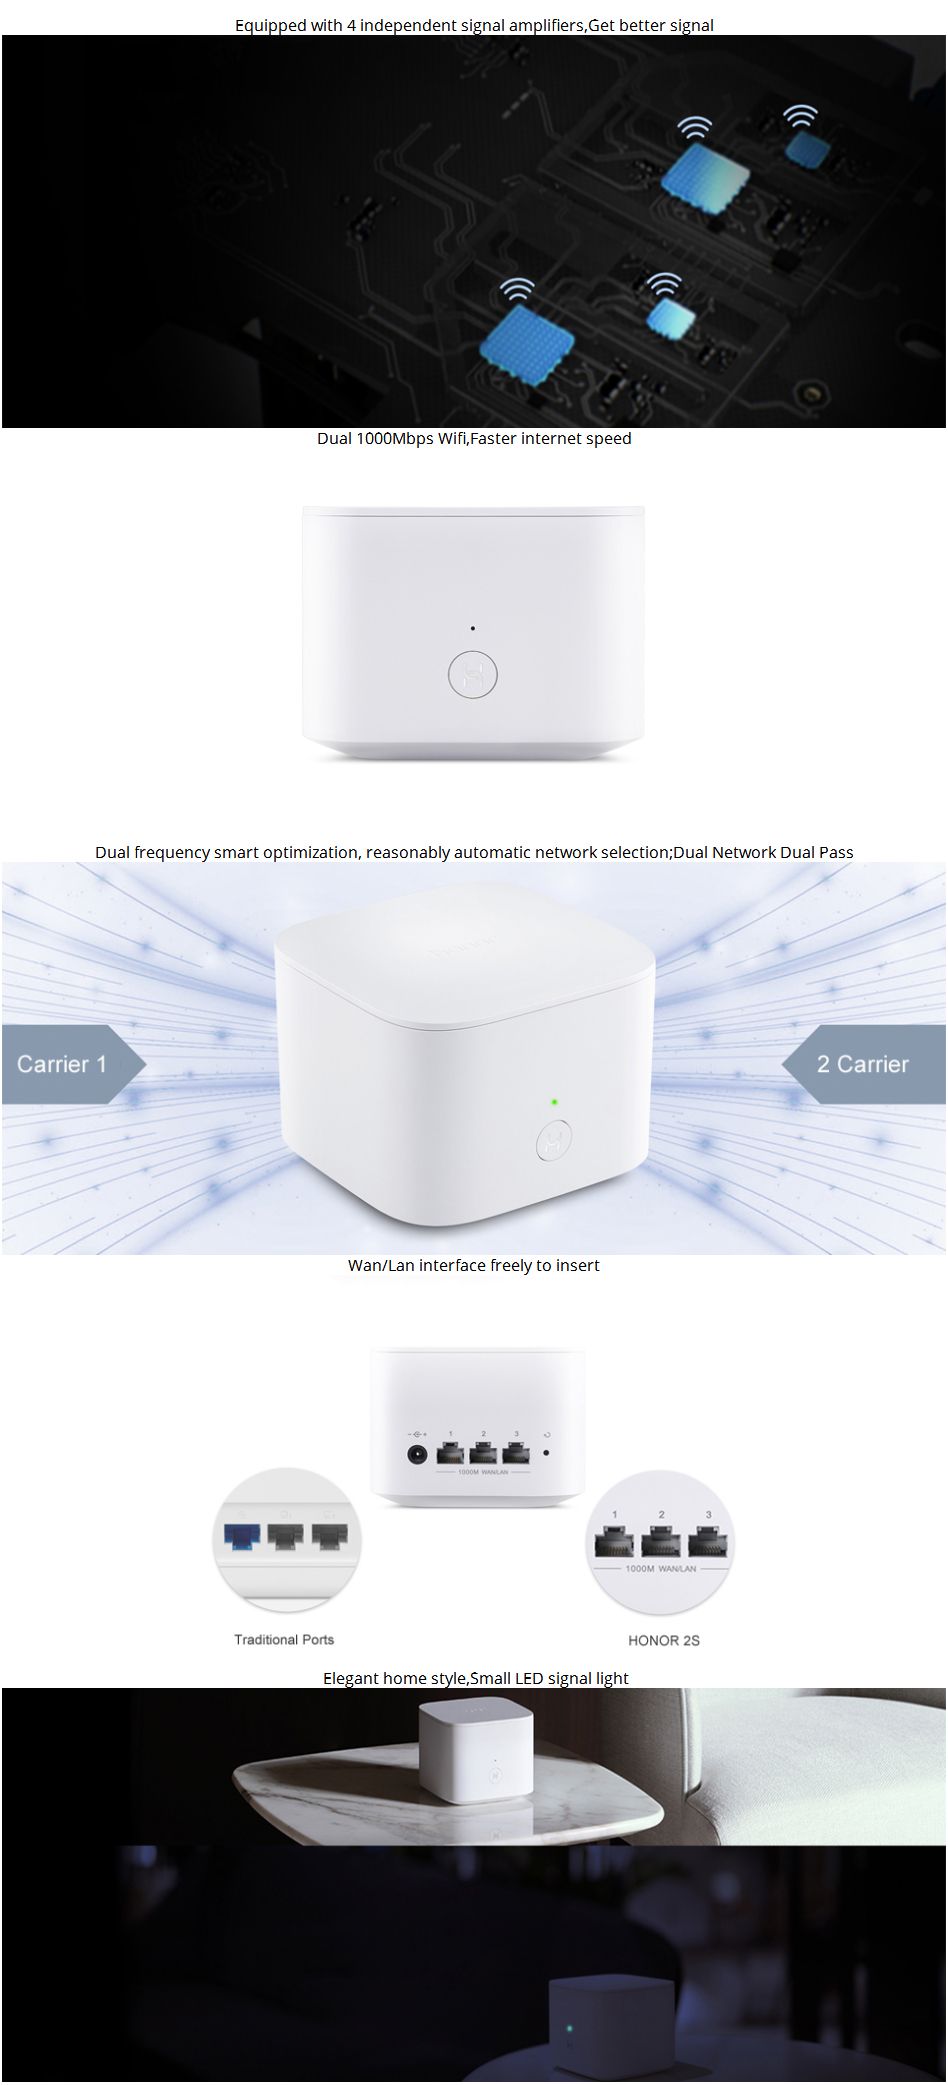 HUAWEI-Honor-2S-Router-HiRouter-CD21-Wireless-24GHz--5GHz-Dual-Bands-1167Mbps-WIFI-4-Signal-Amplifie-1623101